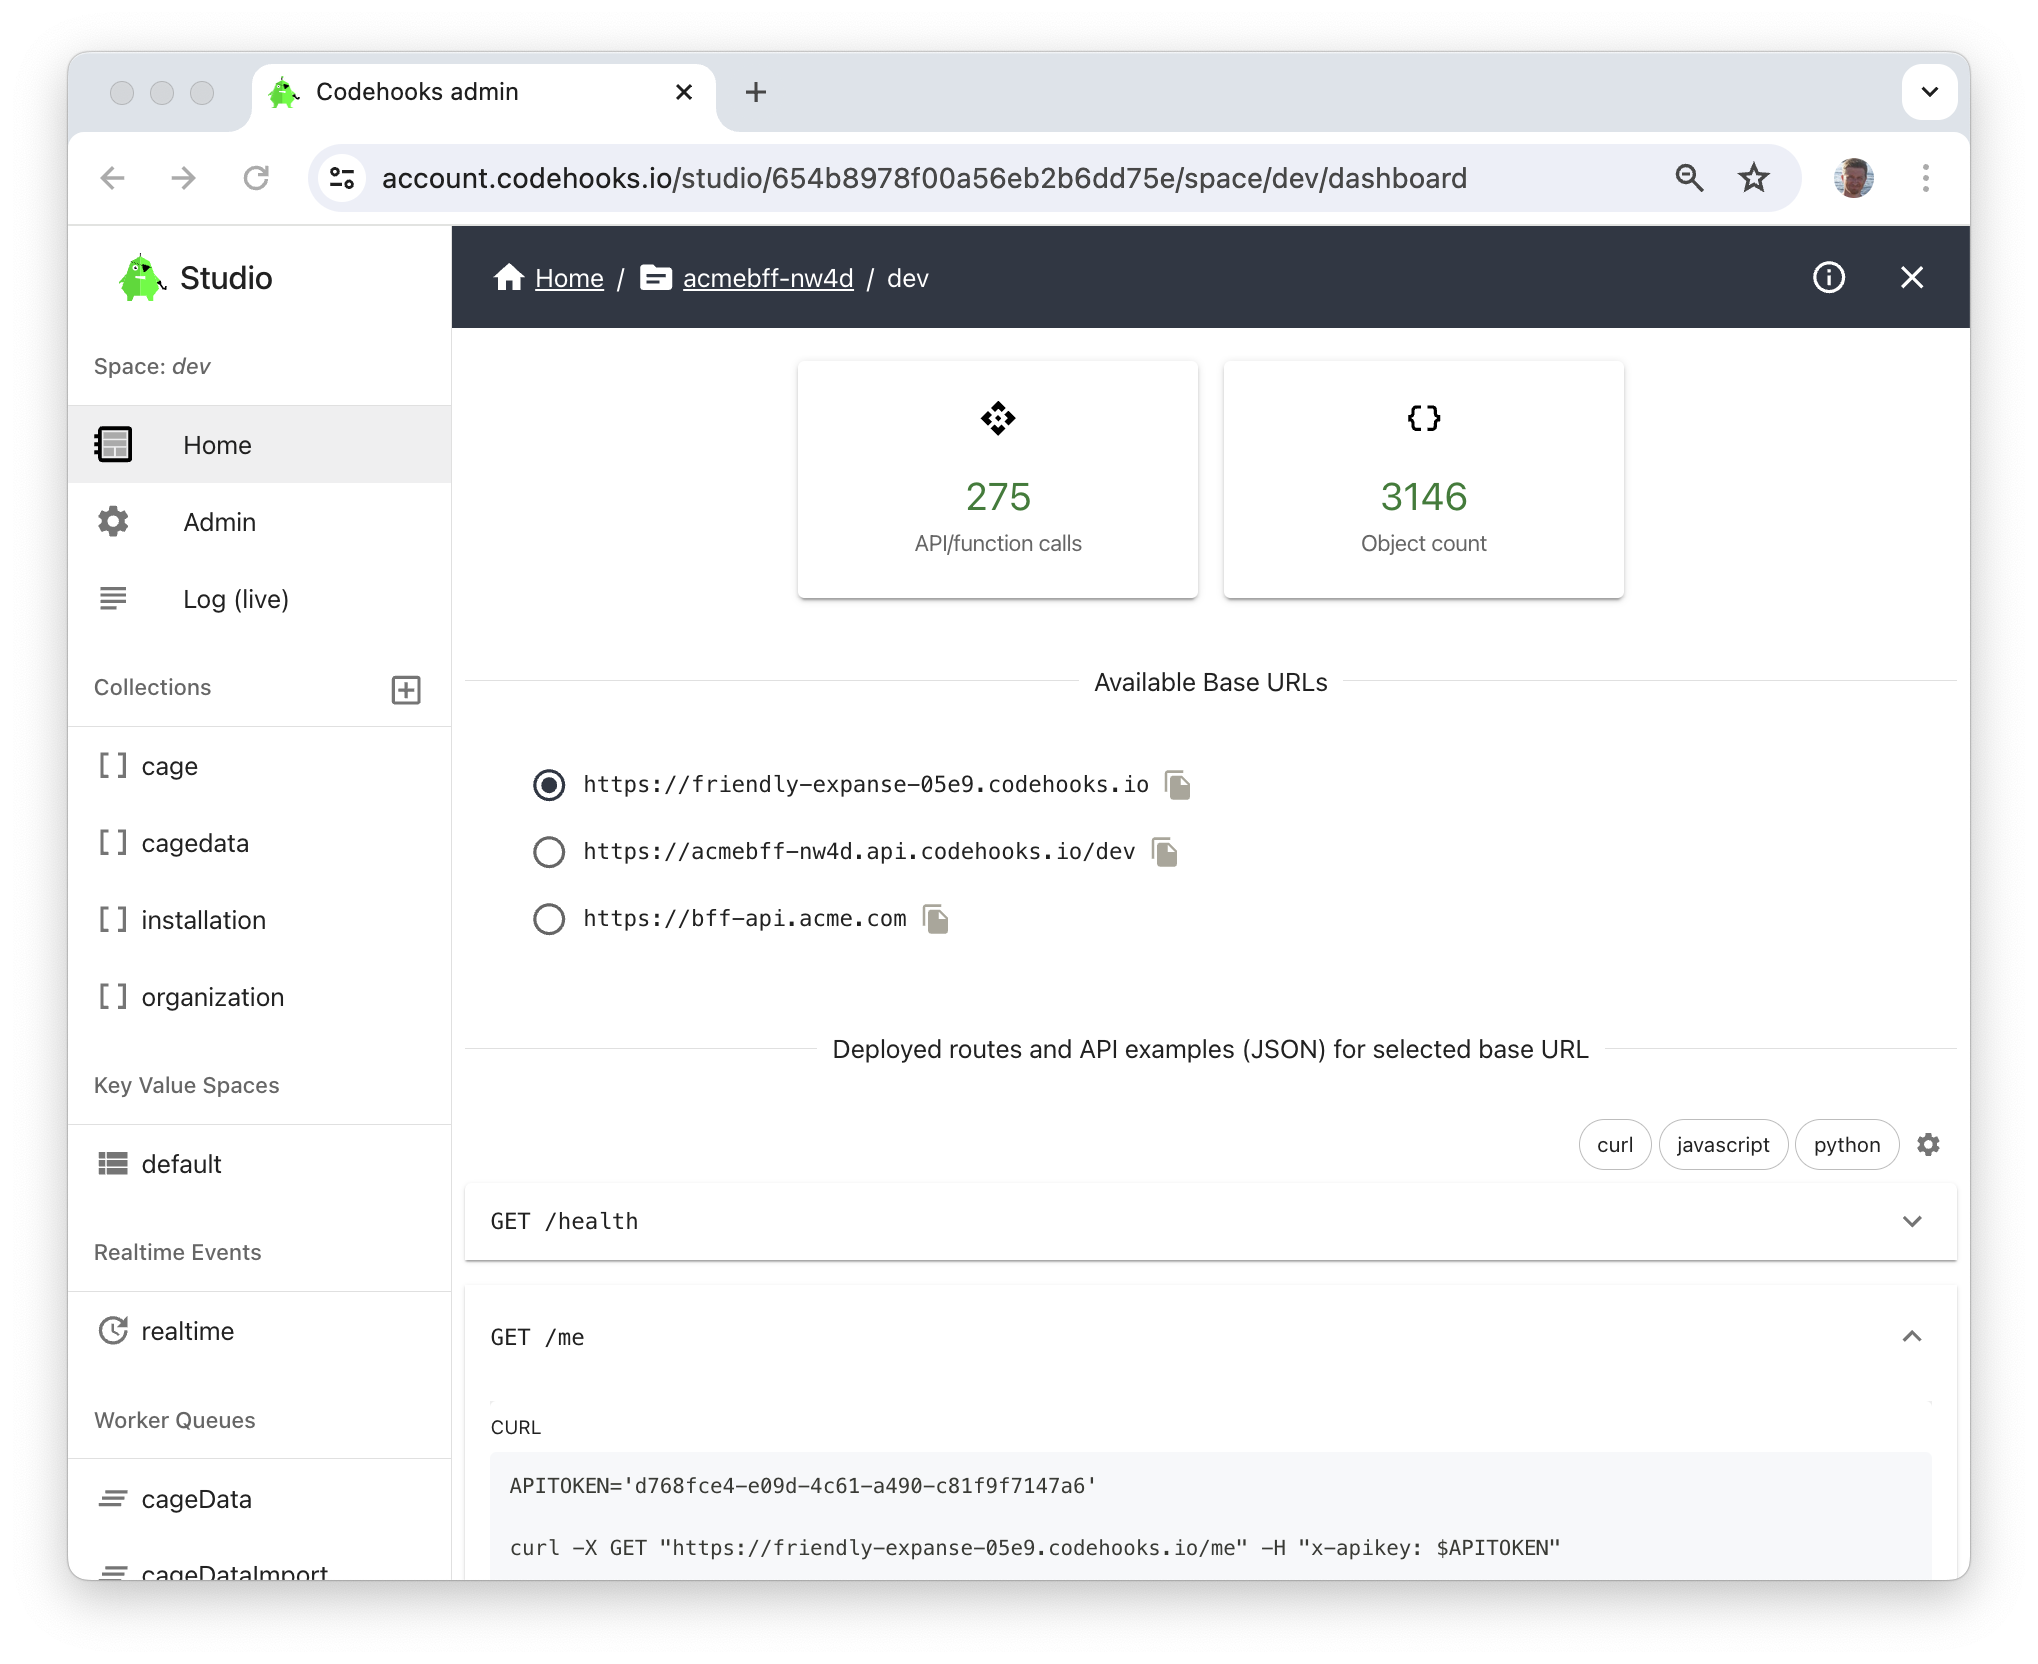 The Dashboard with API endpoints and code examples